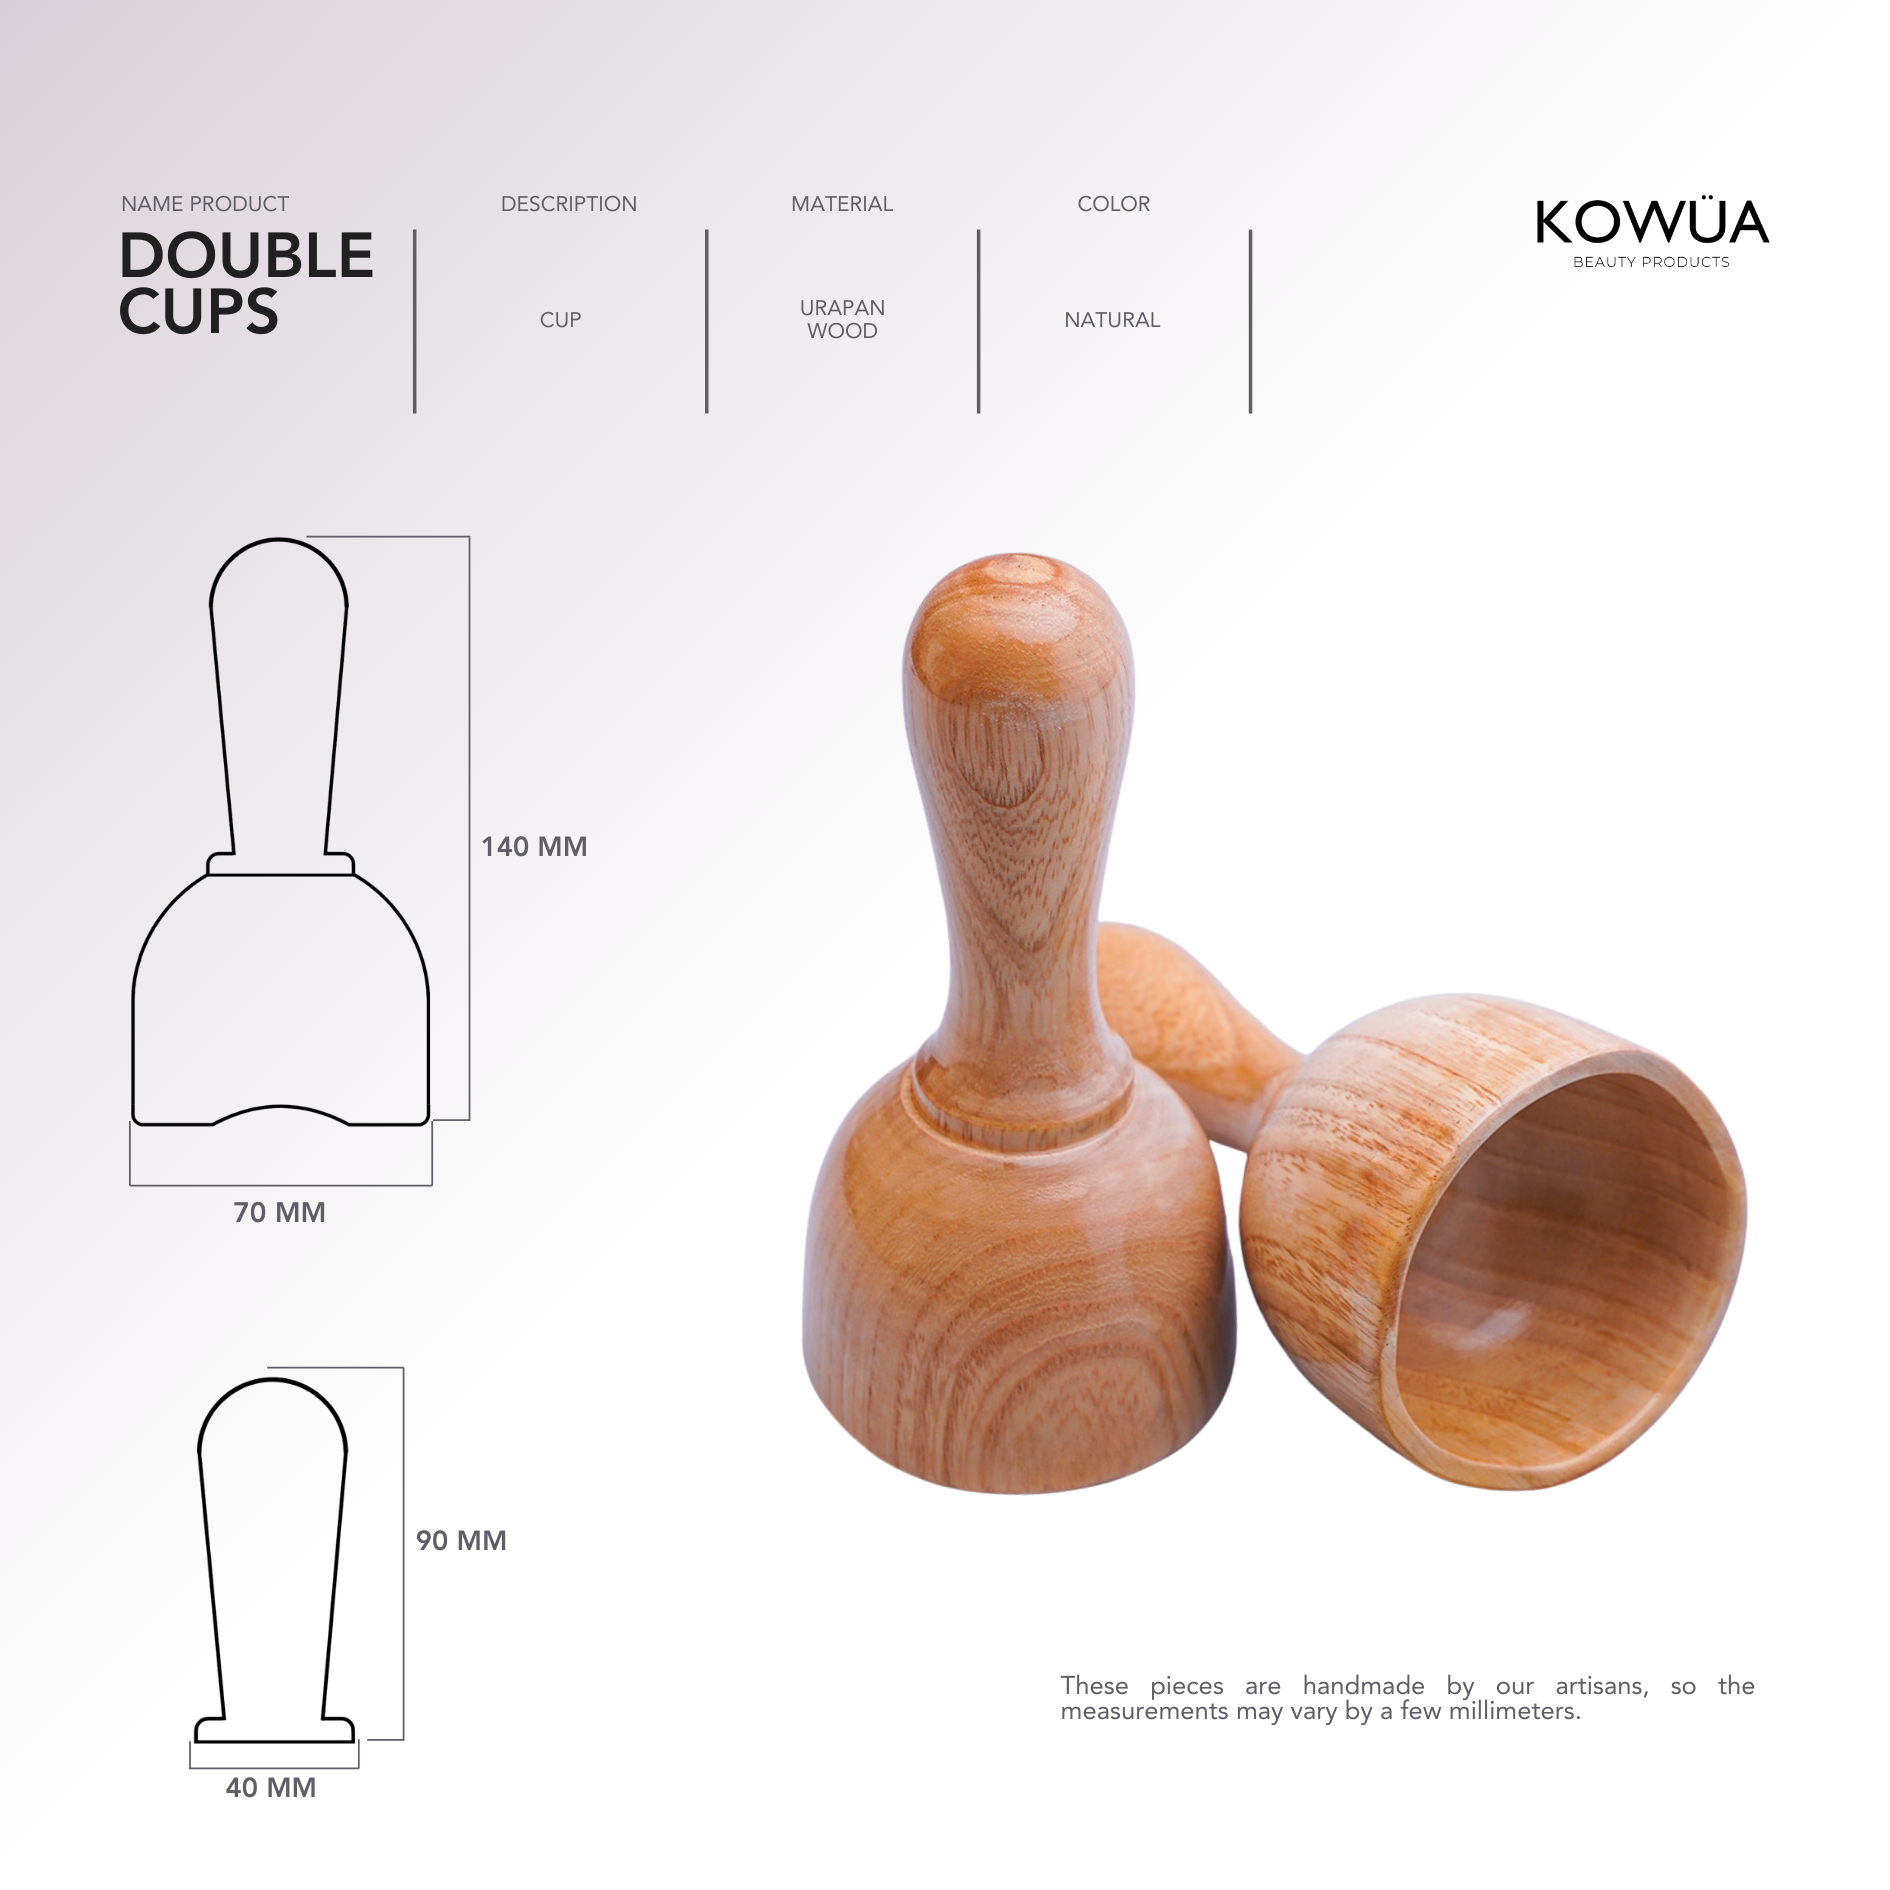 Double Cups